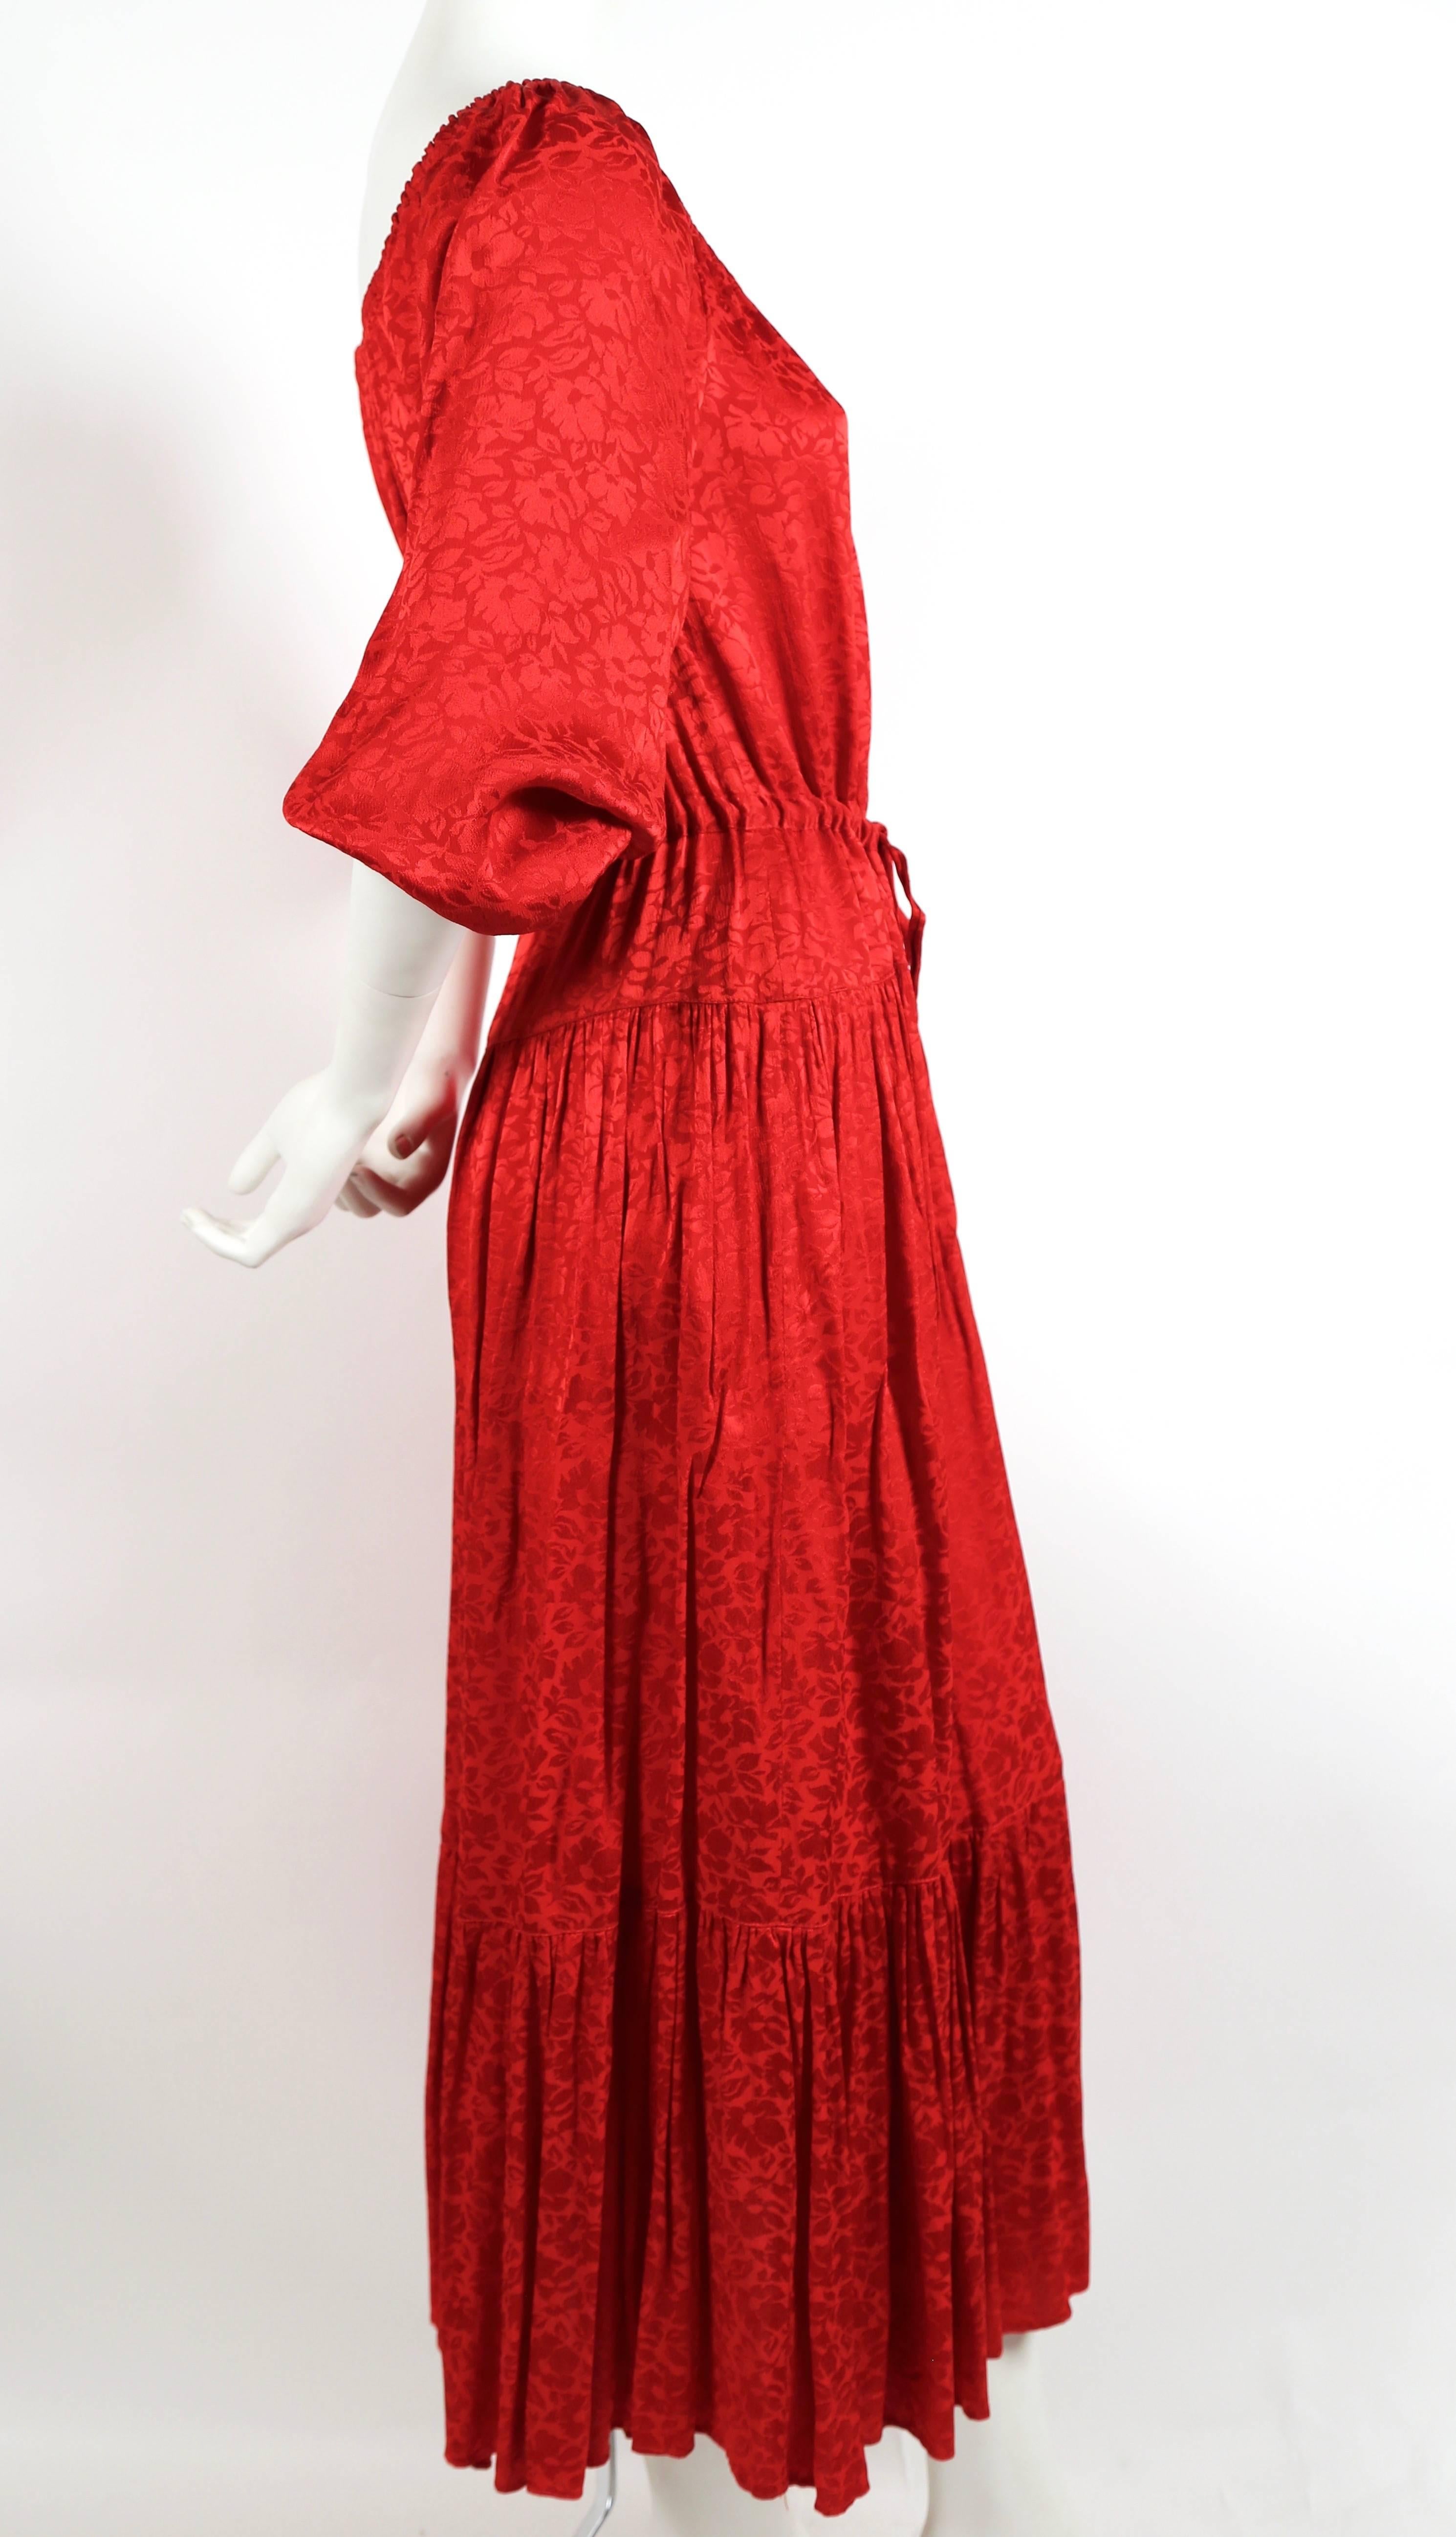 Red floral damask dress designed by Ossie Clark for Radley dating to the 1970's. Labeled a UK 14 however this dress was not clipped on the US size 2 mannequin so it can fit many sizes. Approximate length measurement: 52